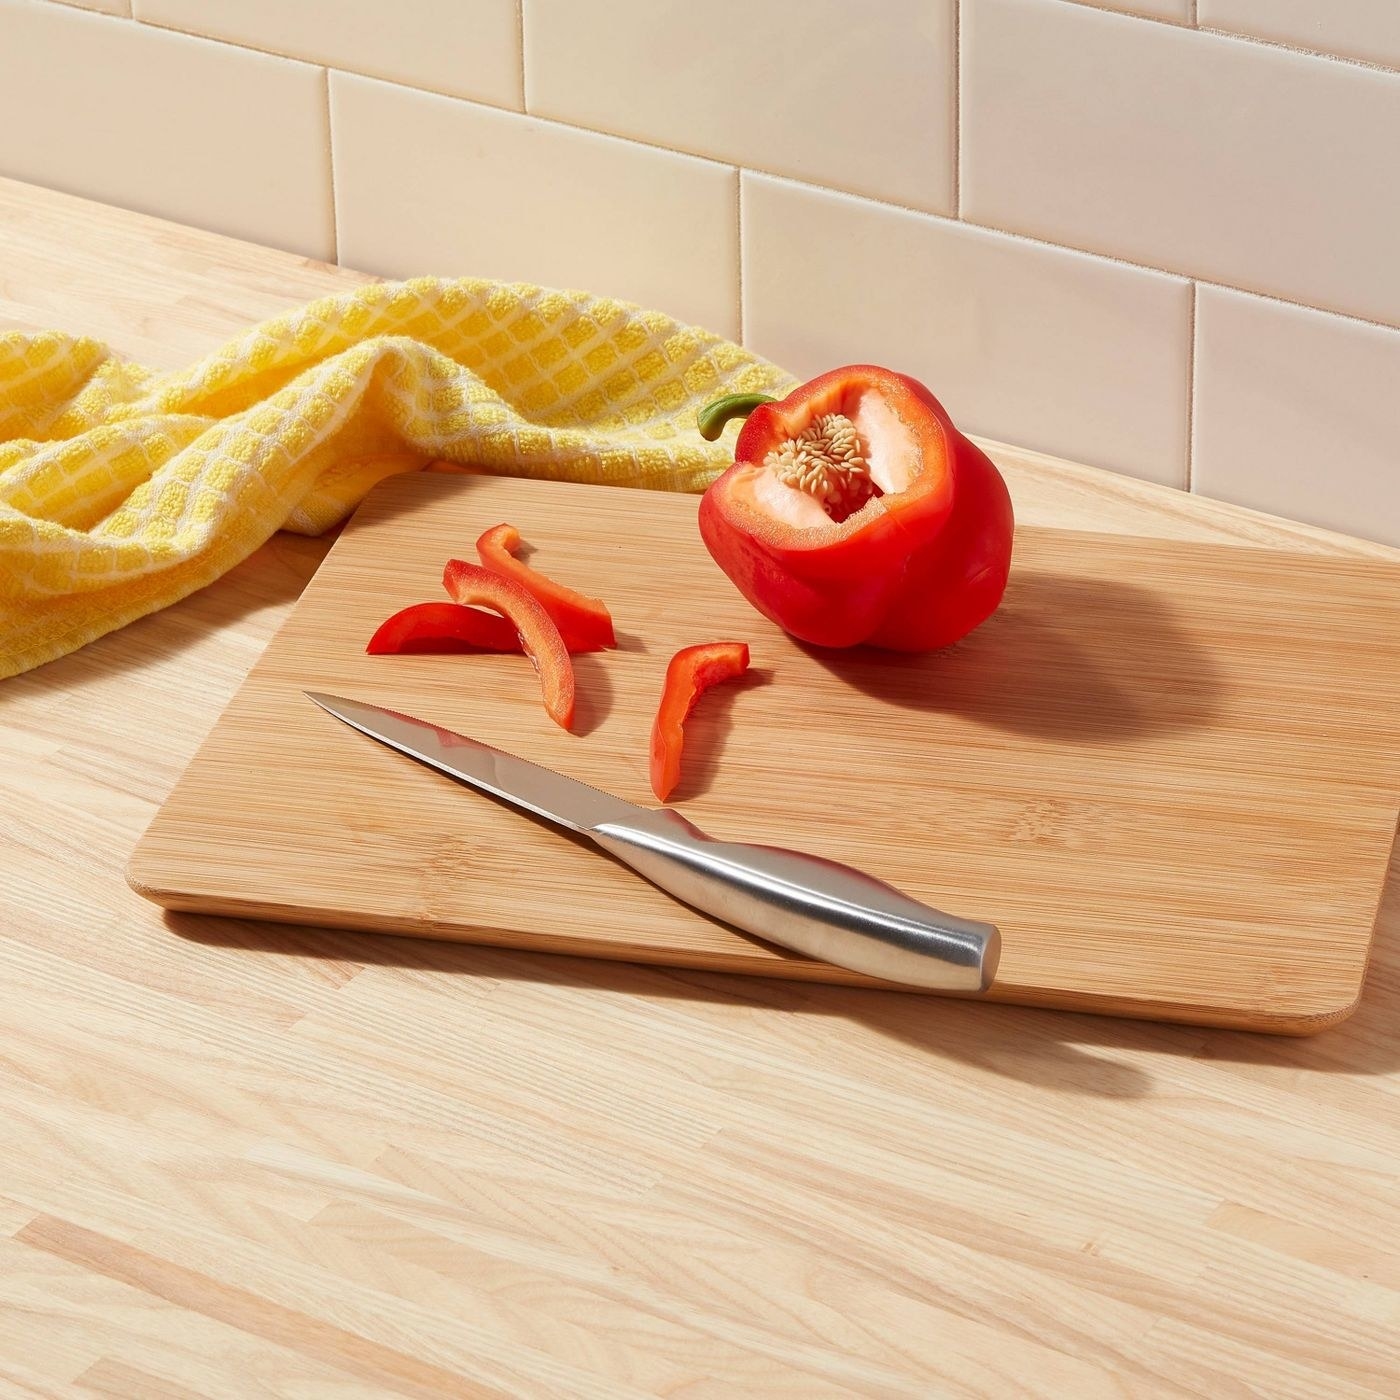 The cutting board with a sliced red pepper on it